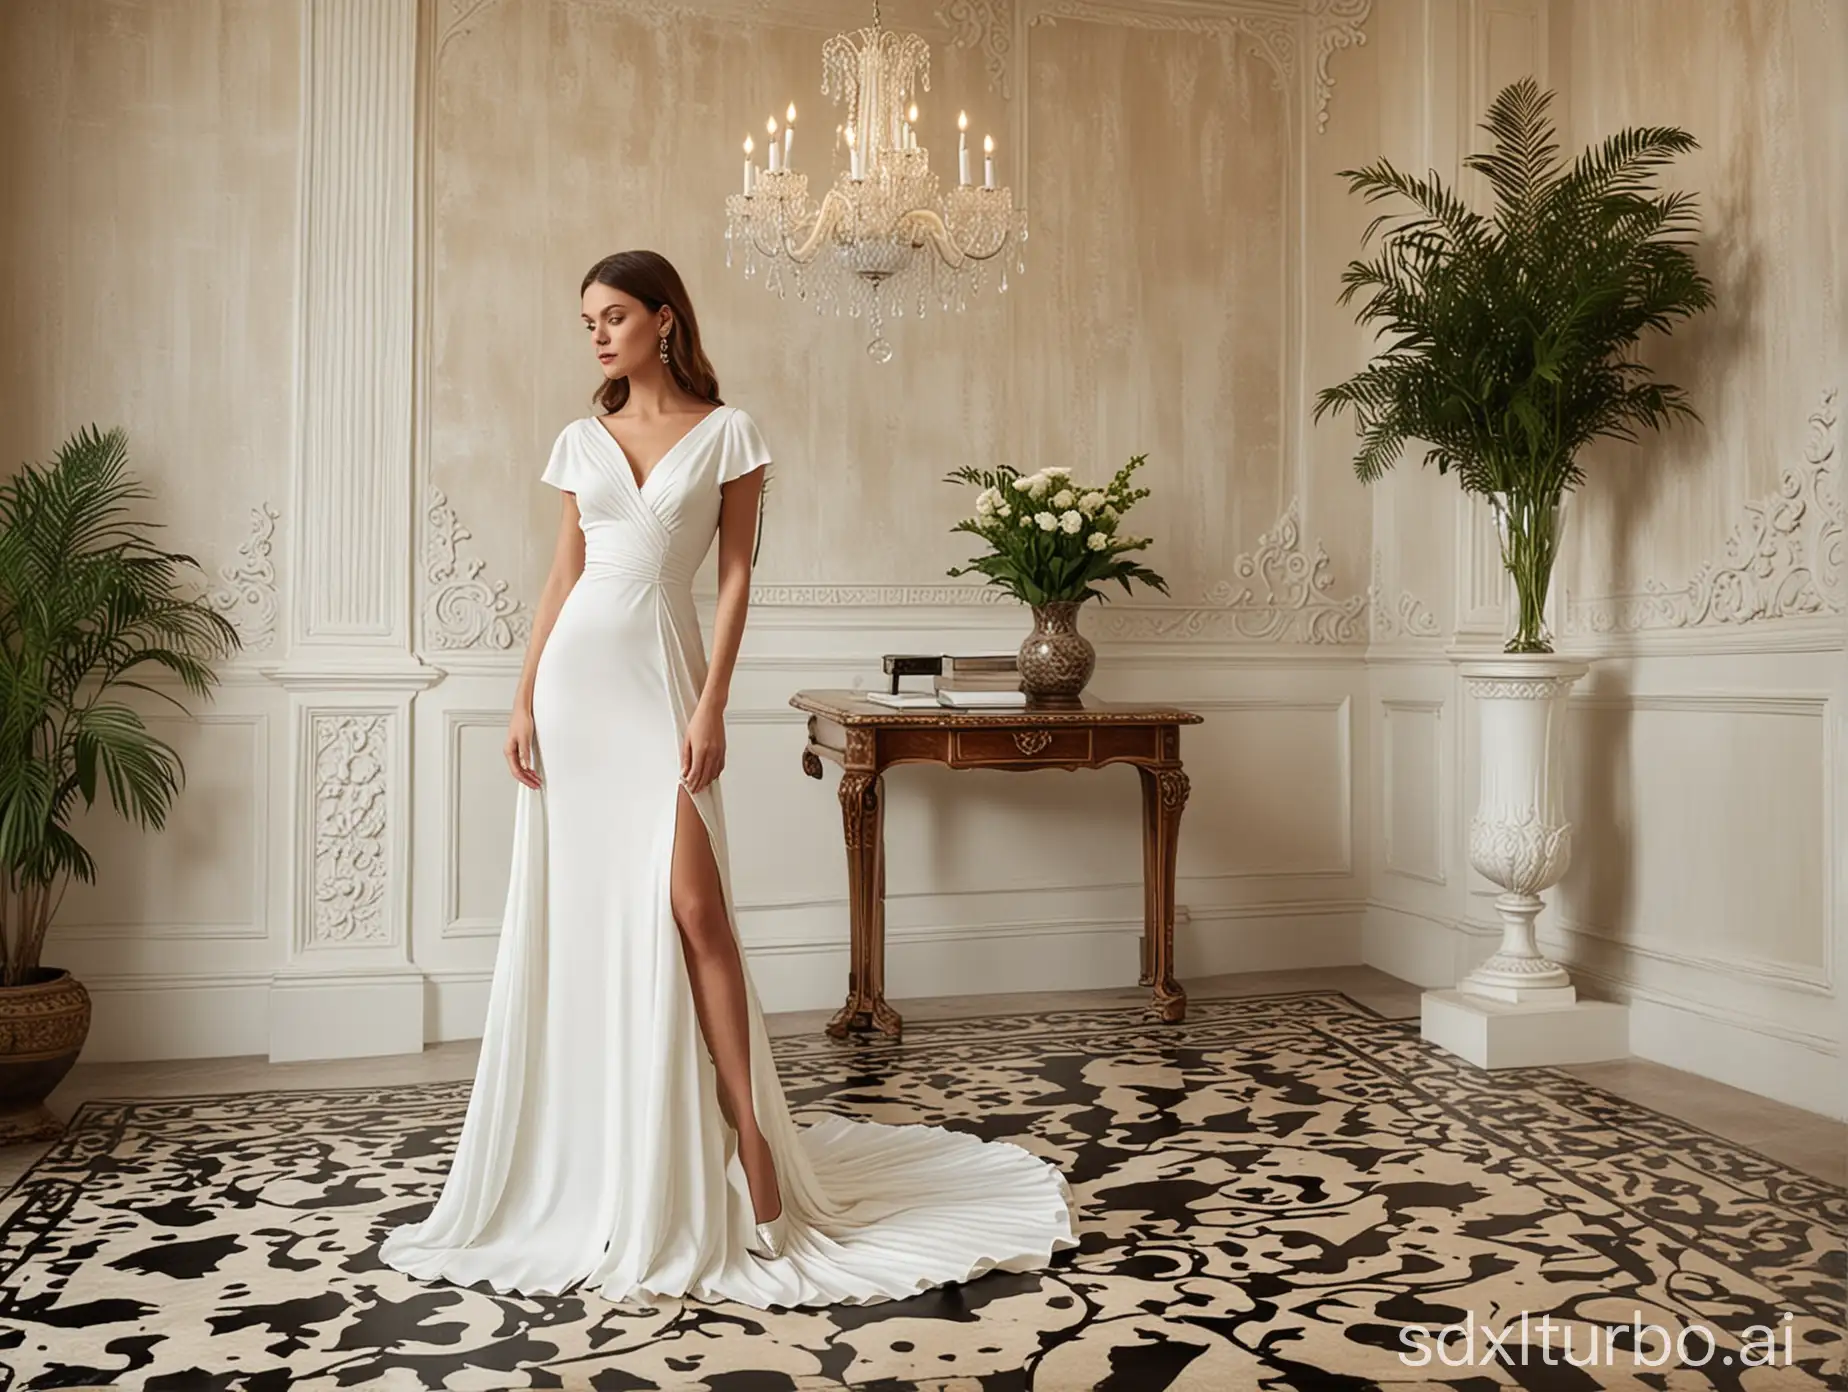 The image captures a person wearing a luxurious white dress in an elegant environment. The background consists of intricately designed walls and modern classics, emitting a magnificent atmosphere. Specific elements or items: Person: Wearing a stunning pure white dress, the hem gracefully extends to the ground. The dress features a deep V-neck and short sleeves design. The high slit reveals a leg, accentuating the elegance of the attire. To protect privacy, the person's face is obscured. Dress details: Made of polyester fiber, it beautifully reflects light. The waist of the dress is pleated, highlighting the wearer's silhouette. Shoes: Paired with delicately designed open-toe high heels, complementing the fashion of the dress. Background environment: A wall with text patterns serves as the background, adding to the grandeur of the scene. A gorgeously decorated classical design table can be seen, with a vase filled with plants on top. Floor: The glossy floor reflects some elements of the room, making the overall presentation more perfect.